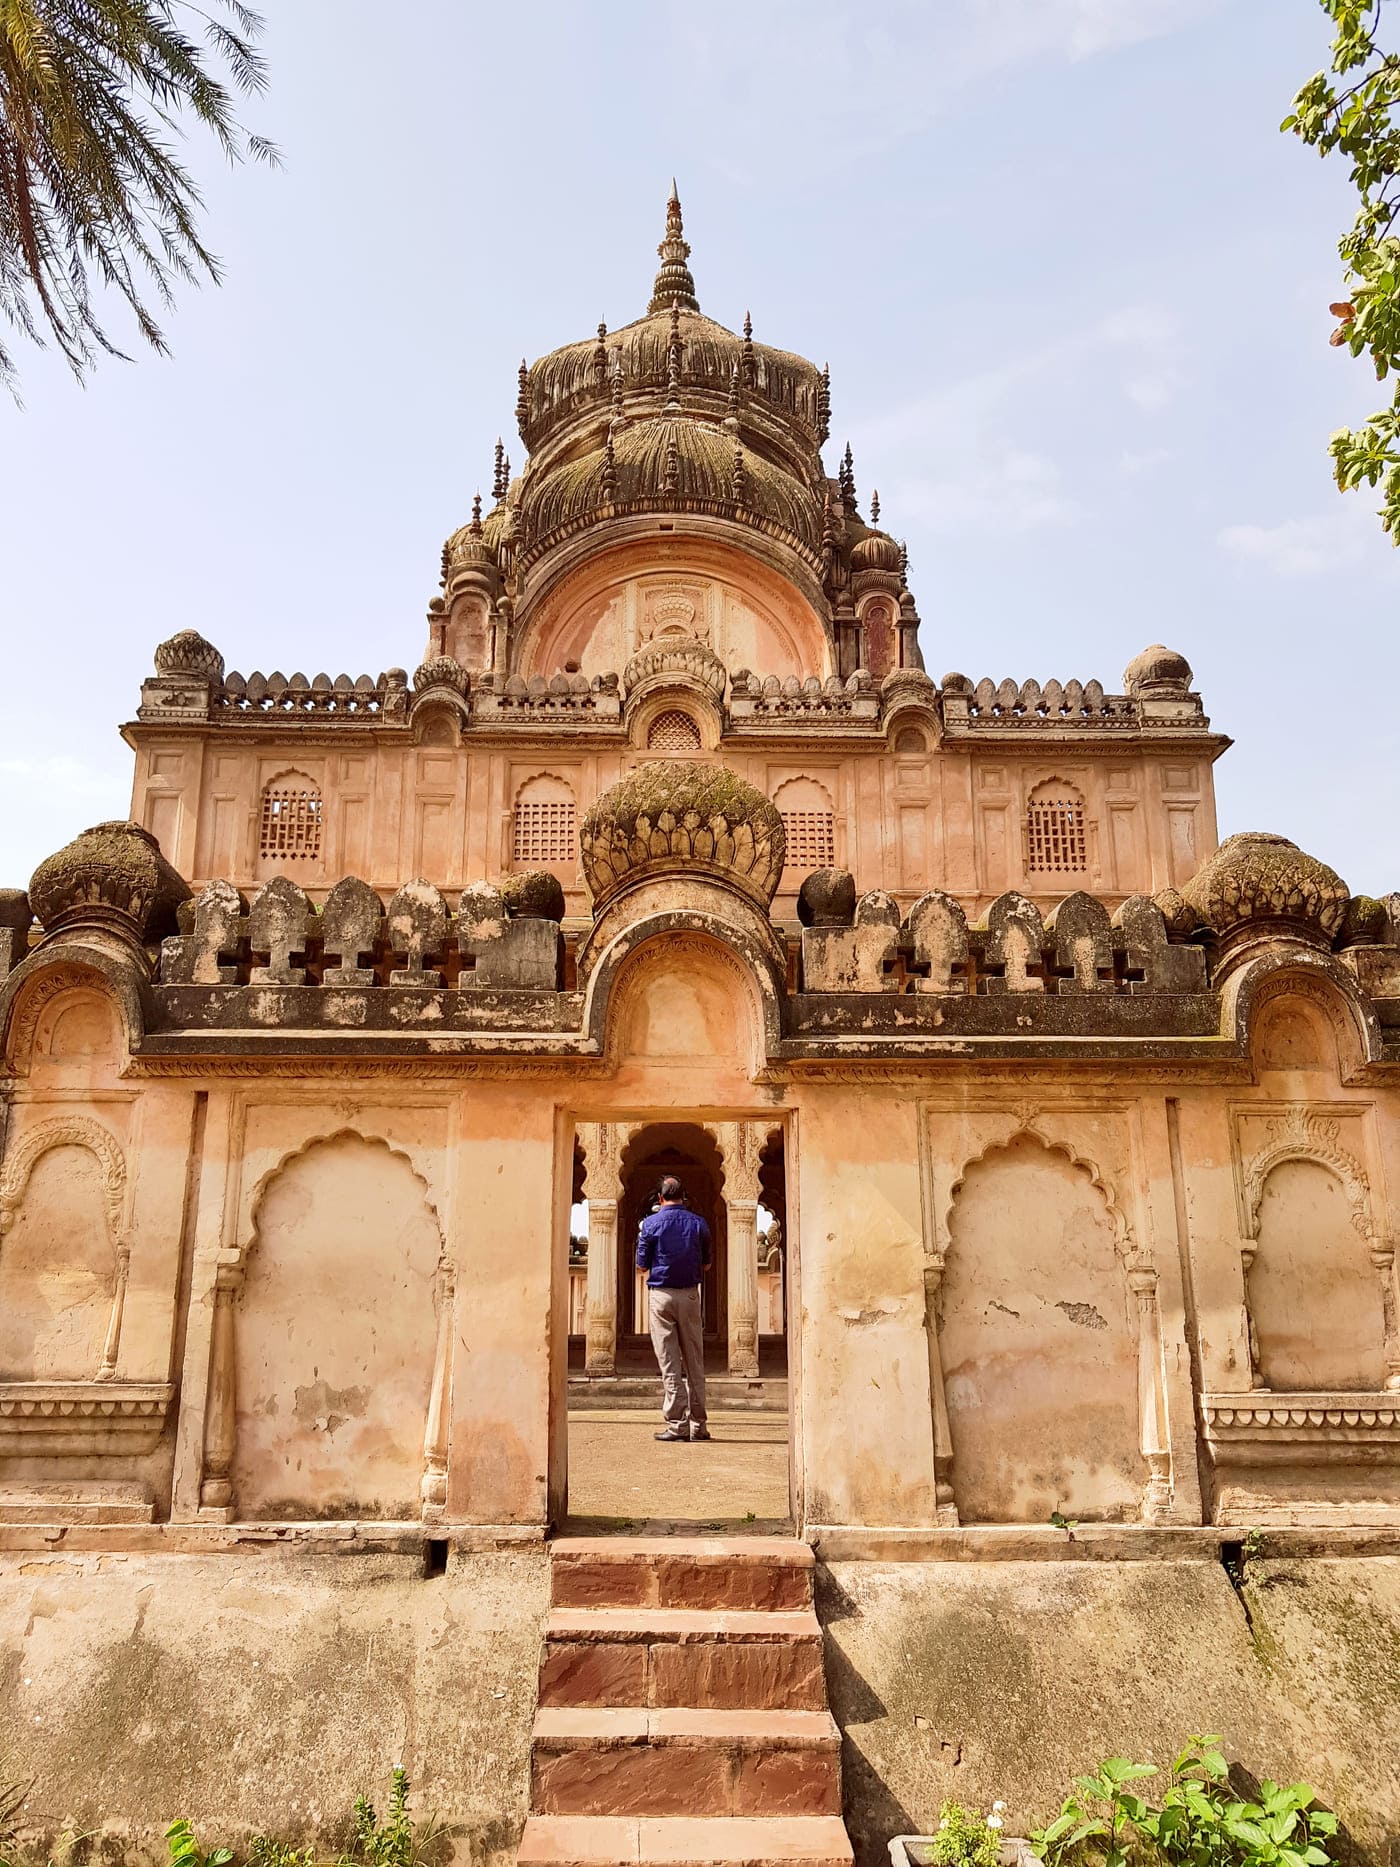 A visitor stands inside the outer rim wall of the Datia Palace in Madhya Pradesh, in awe of the majestic Bundela heritage and the imperial charm that this age-old monument exudes